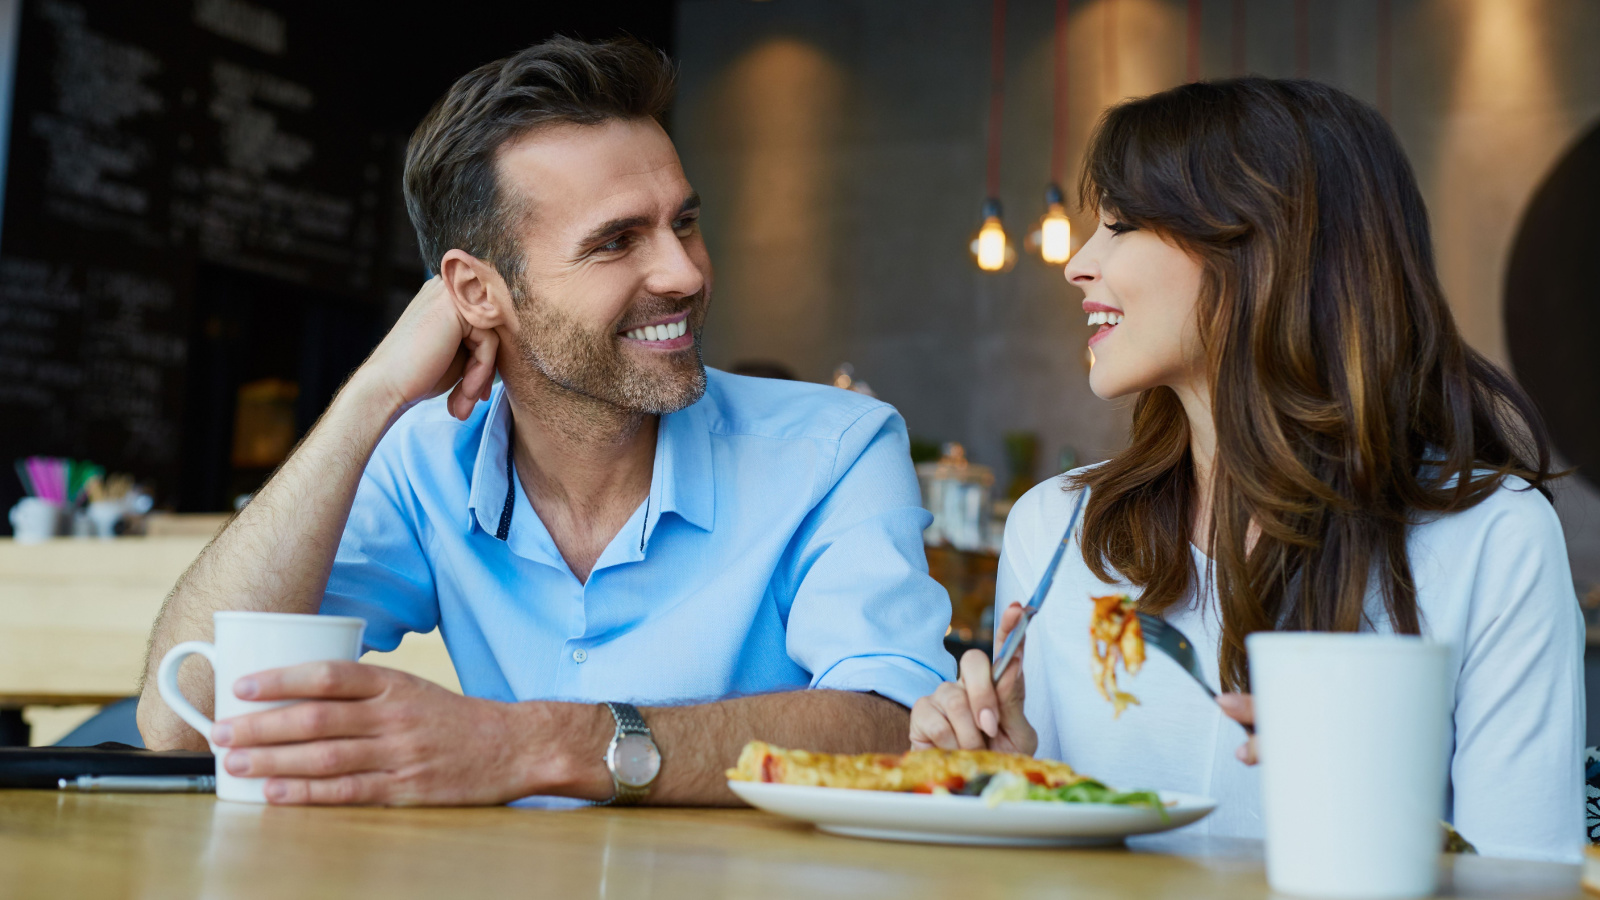 image credit: baranq/shutterstock <p><span>“The art of conversation is the heart of a successful dinner party,” comments a seasoned host in a forum. It’s important to consider the mix of guests and how they might interact. Facilitating introductions and lightly steering conversations can prevent awkward silences and ensure everyone feels included.</span></p>